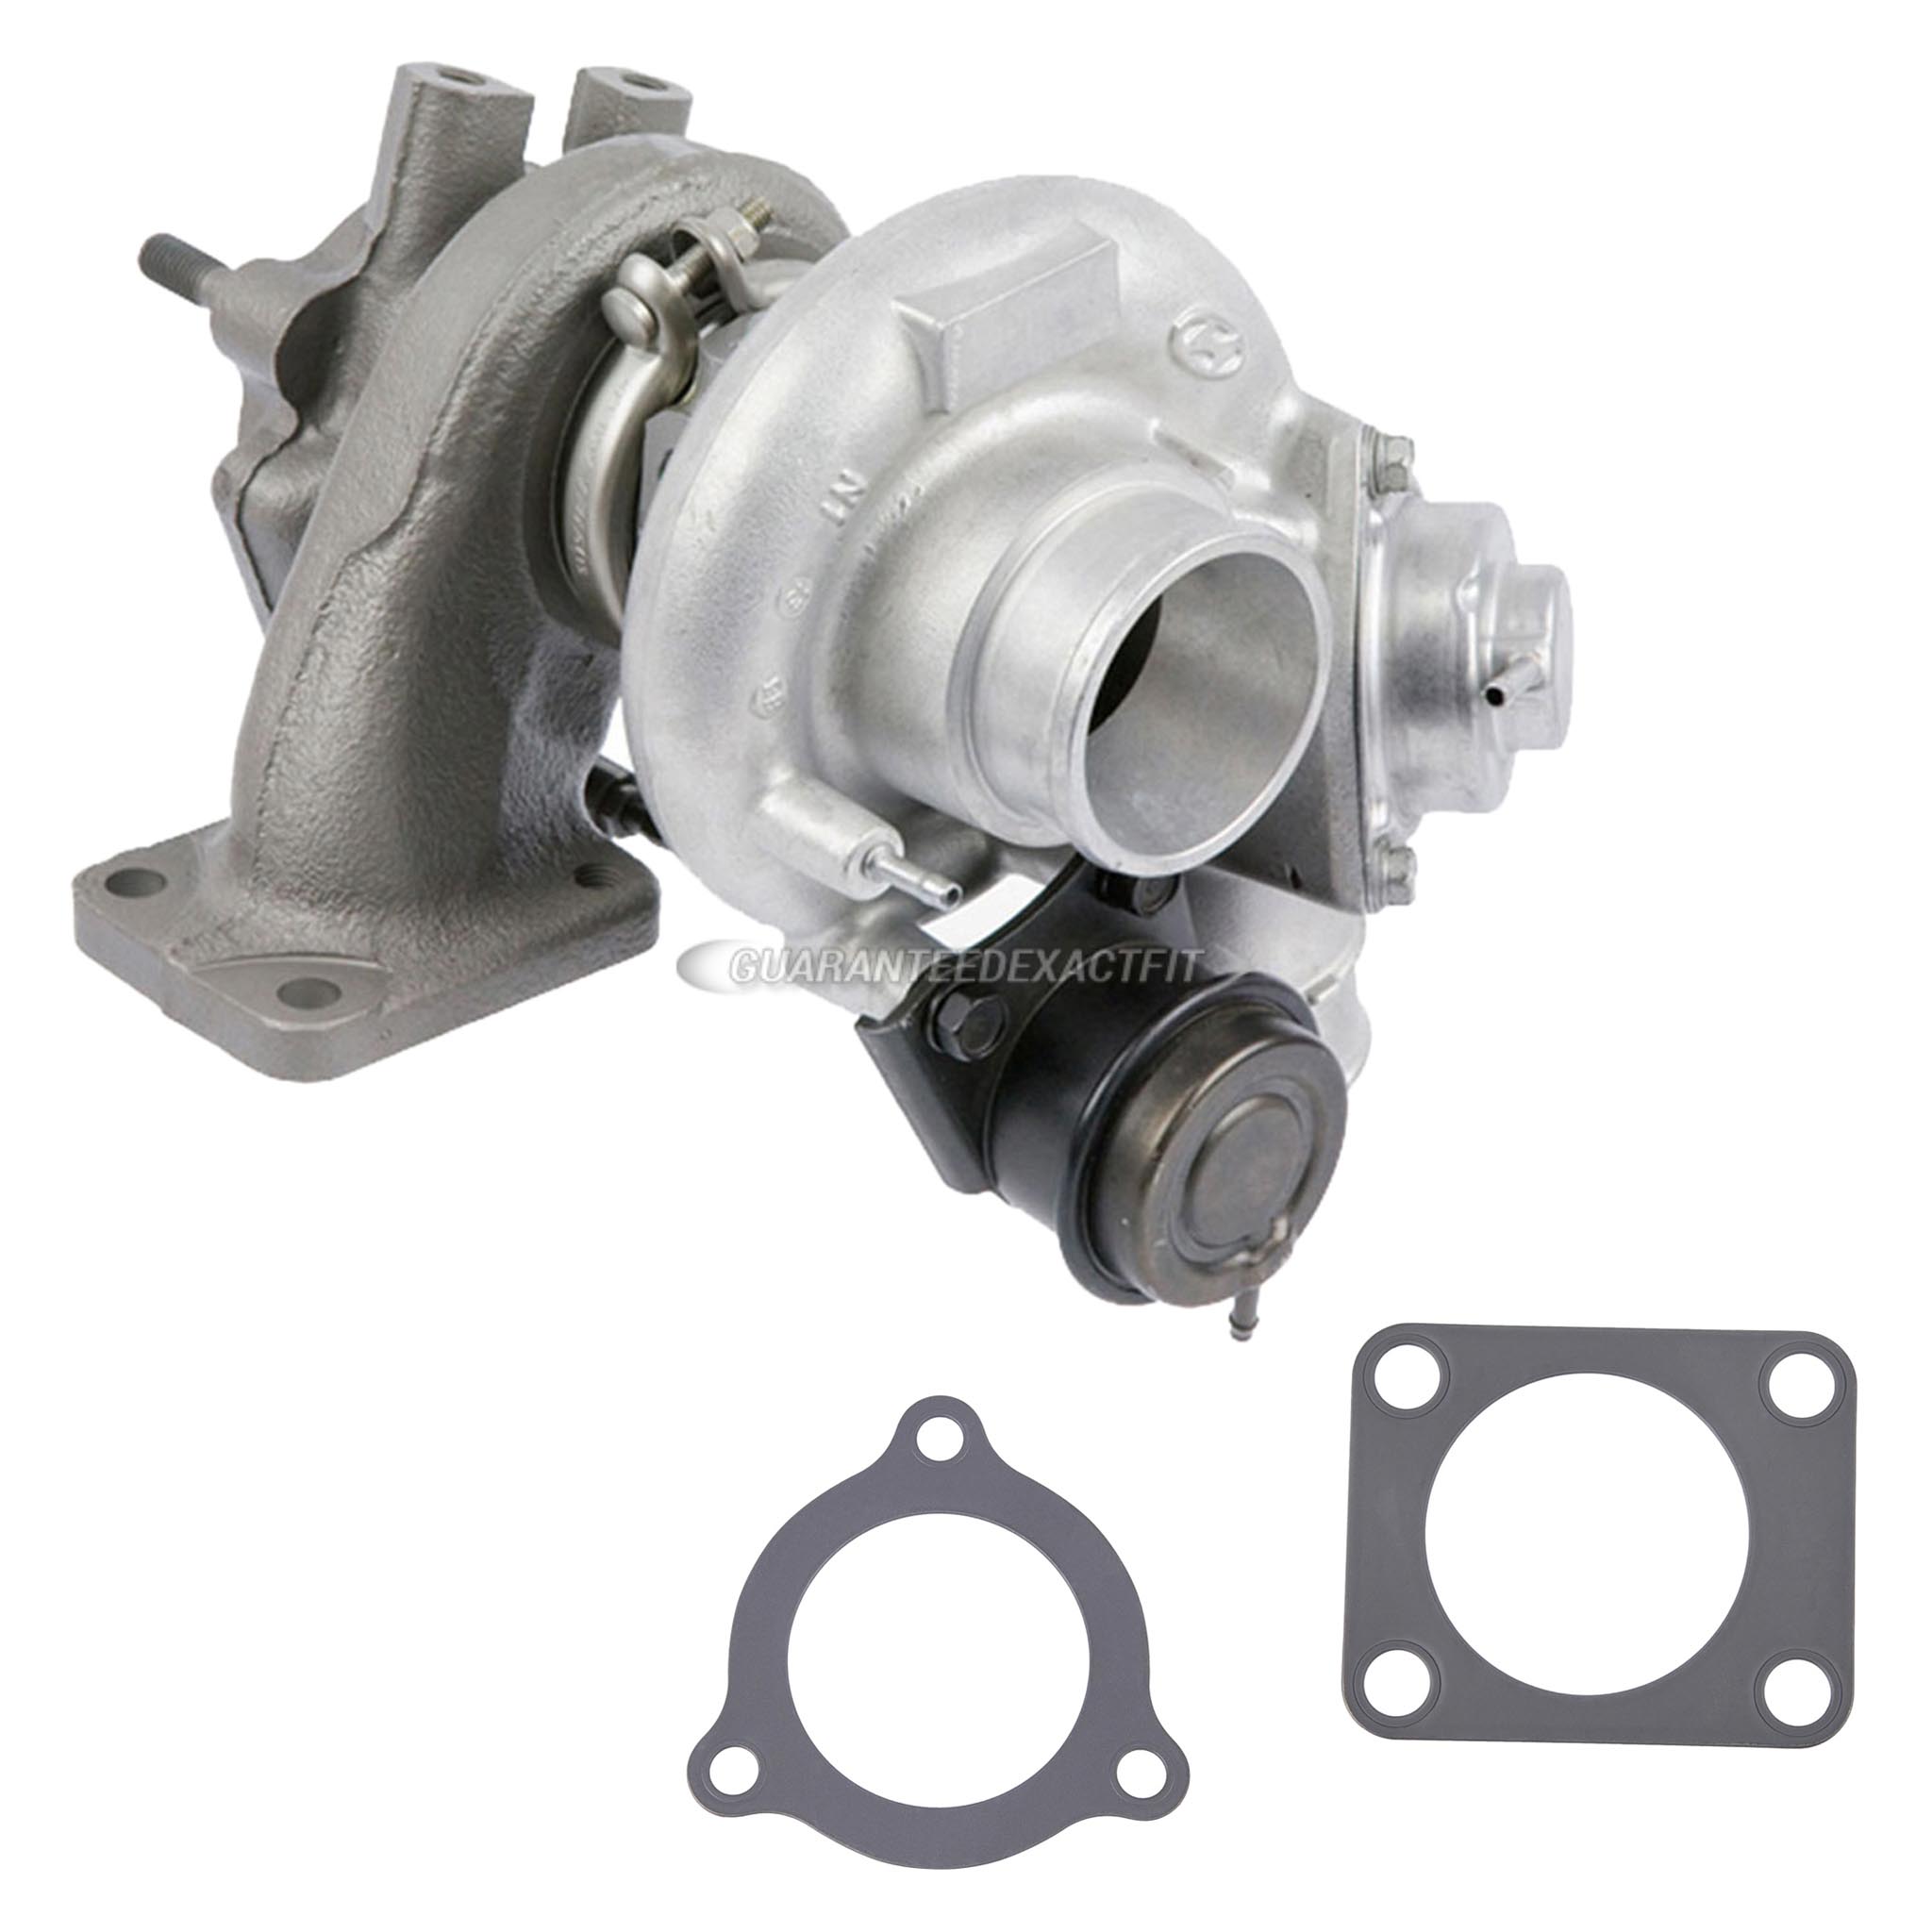  Hyundai genesis coupe turbocharger and installation accessory kit 